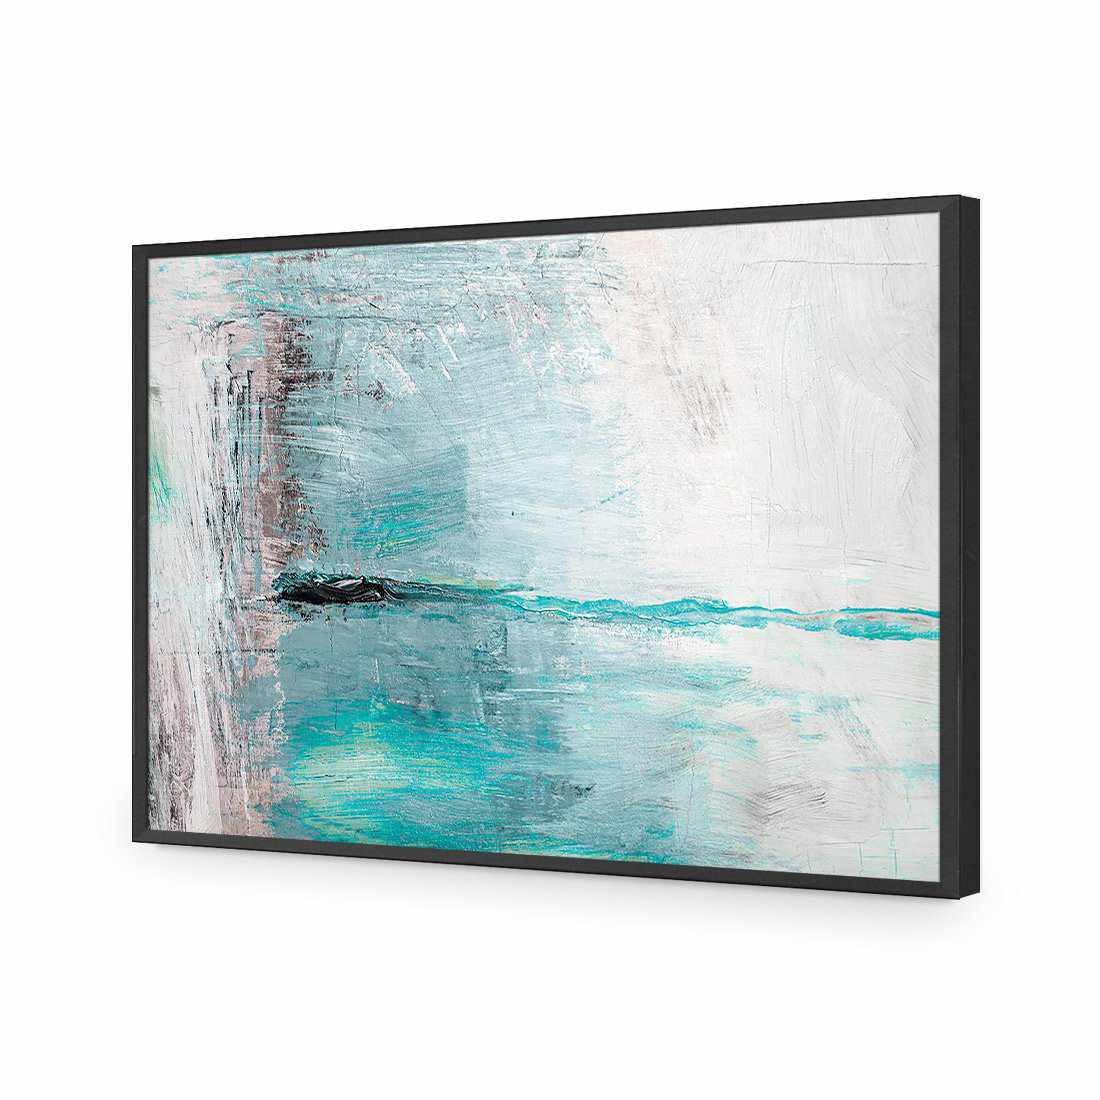 Painting The Sky-Acrylic-Wall Art Design-Without Border-Acrylic - Black Frame-45x30cm-Wall Art Designs